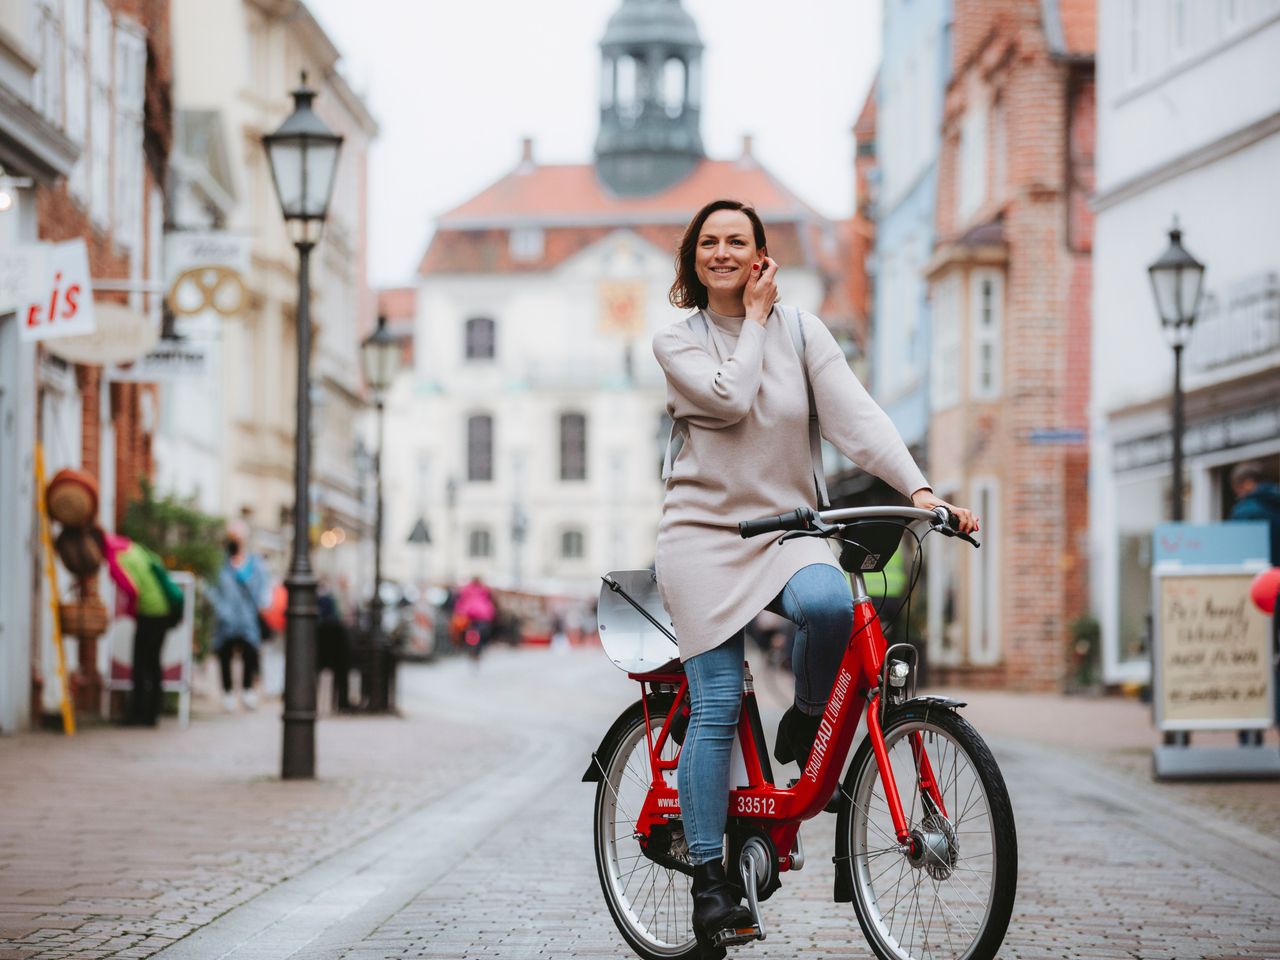 Woman in a city center on a bike